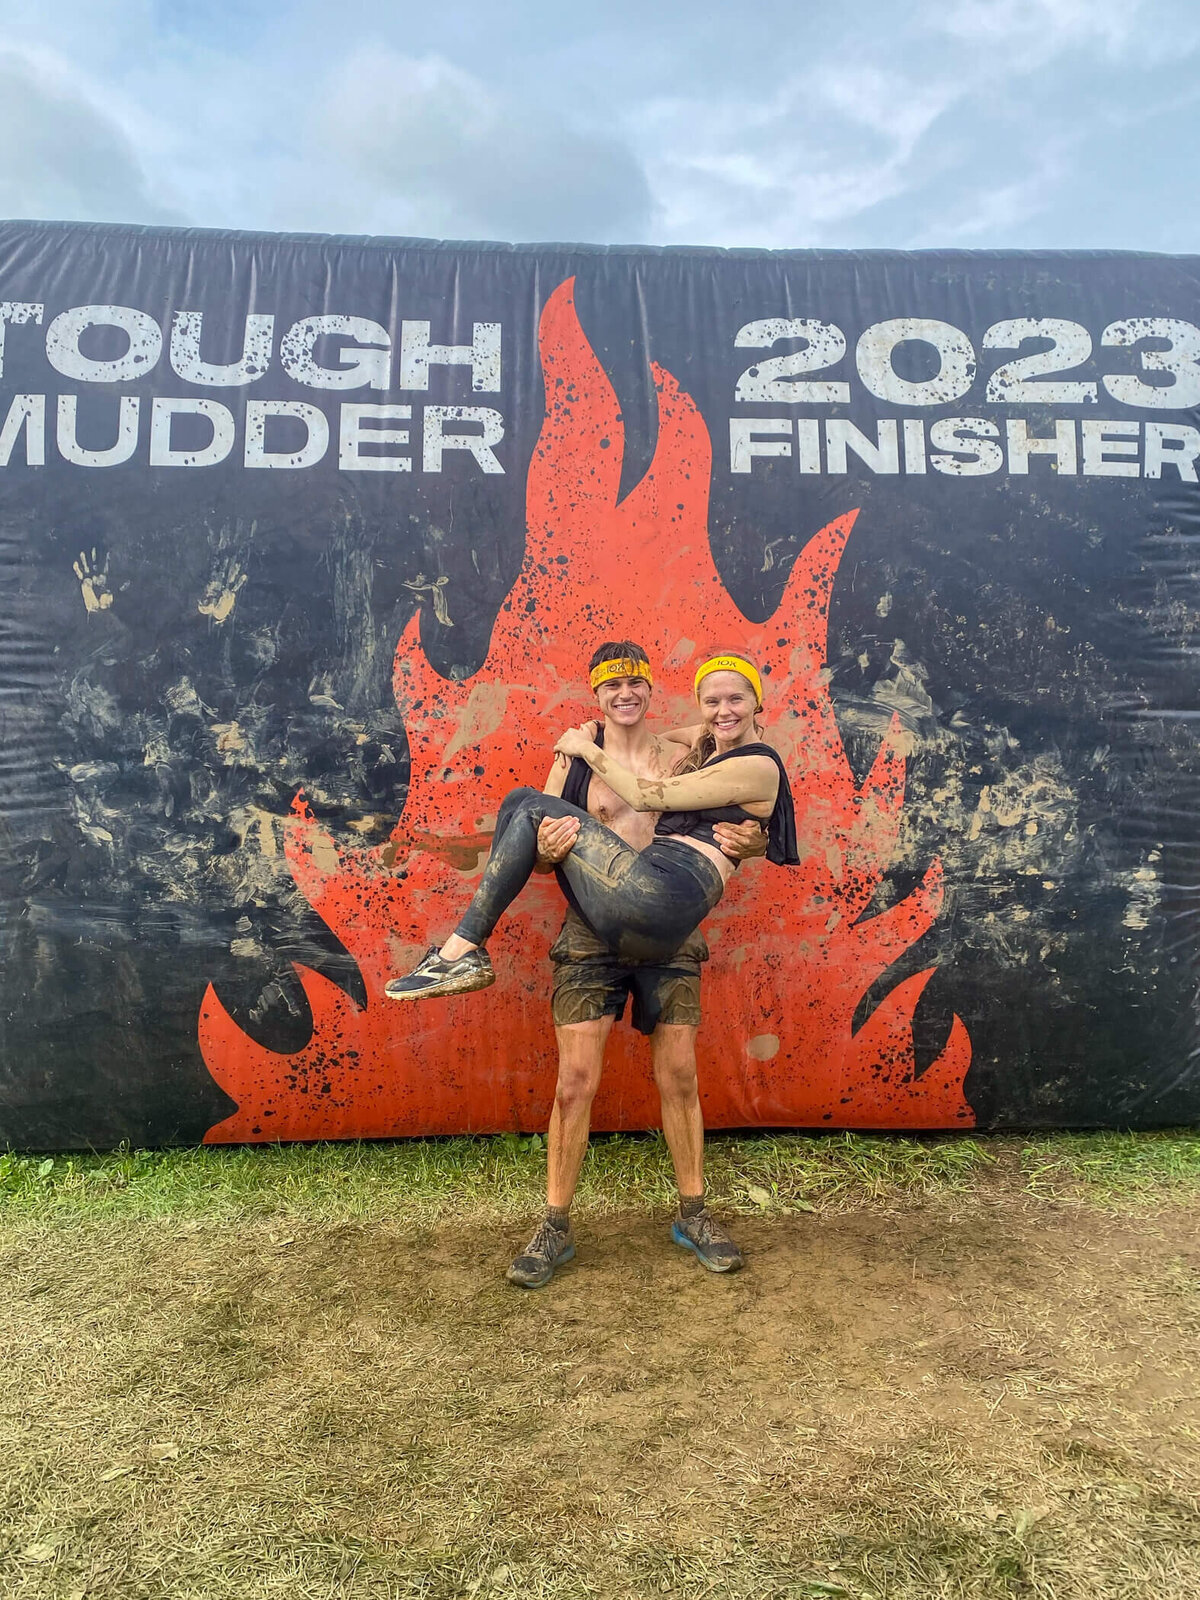 Michael and Deidra hold onto each other in celebration after completing the Pittsburgh Tough Mudder